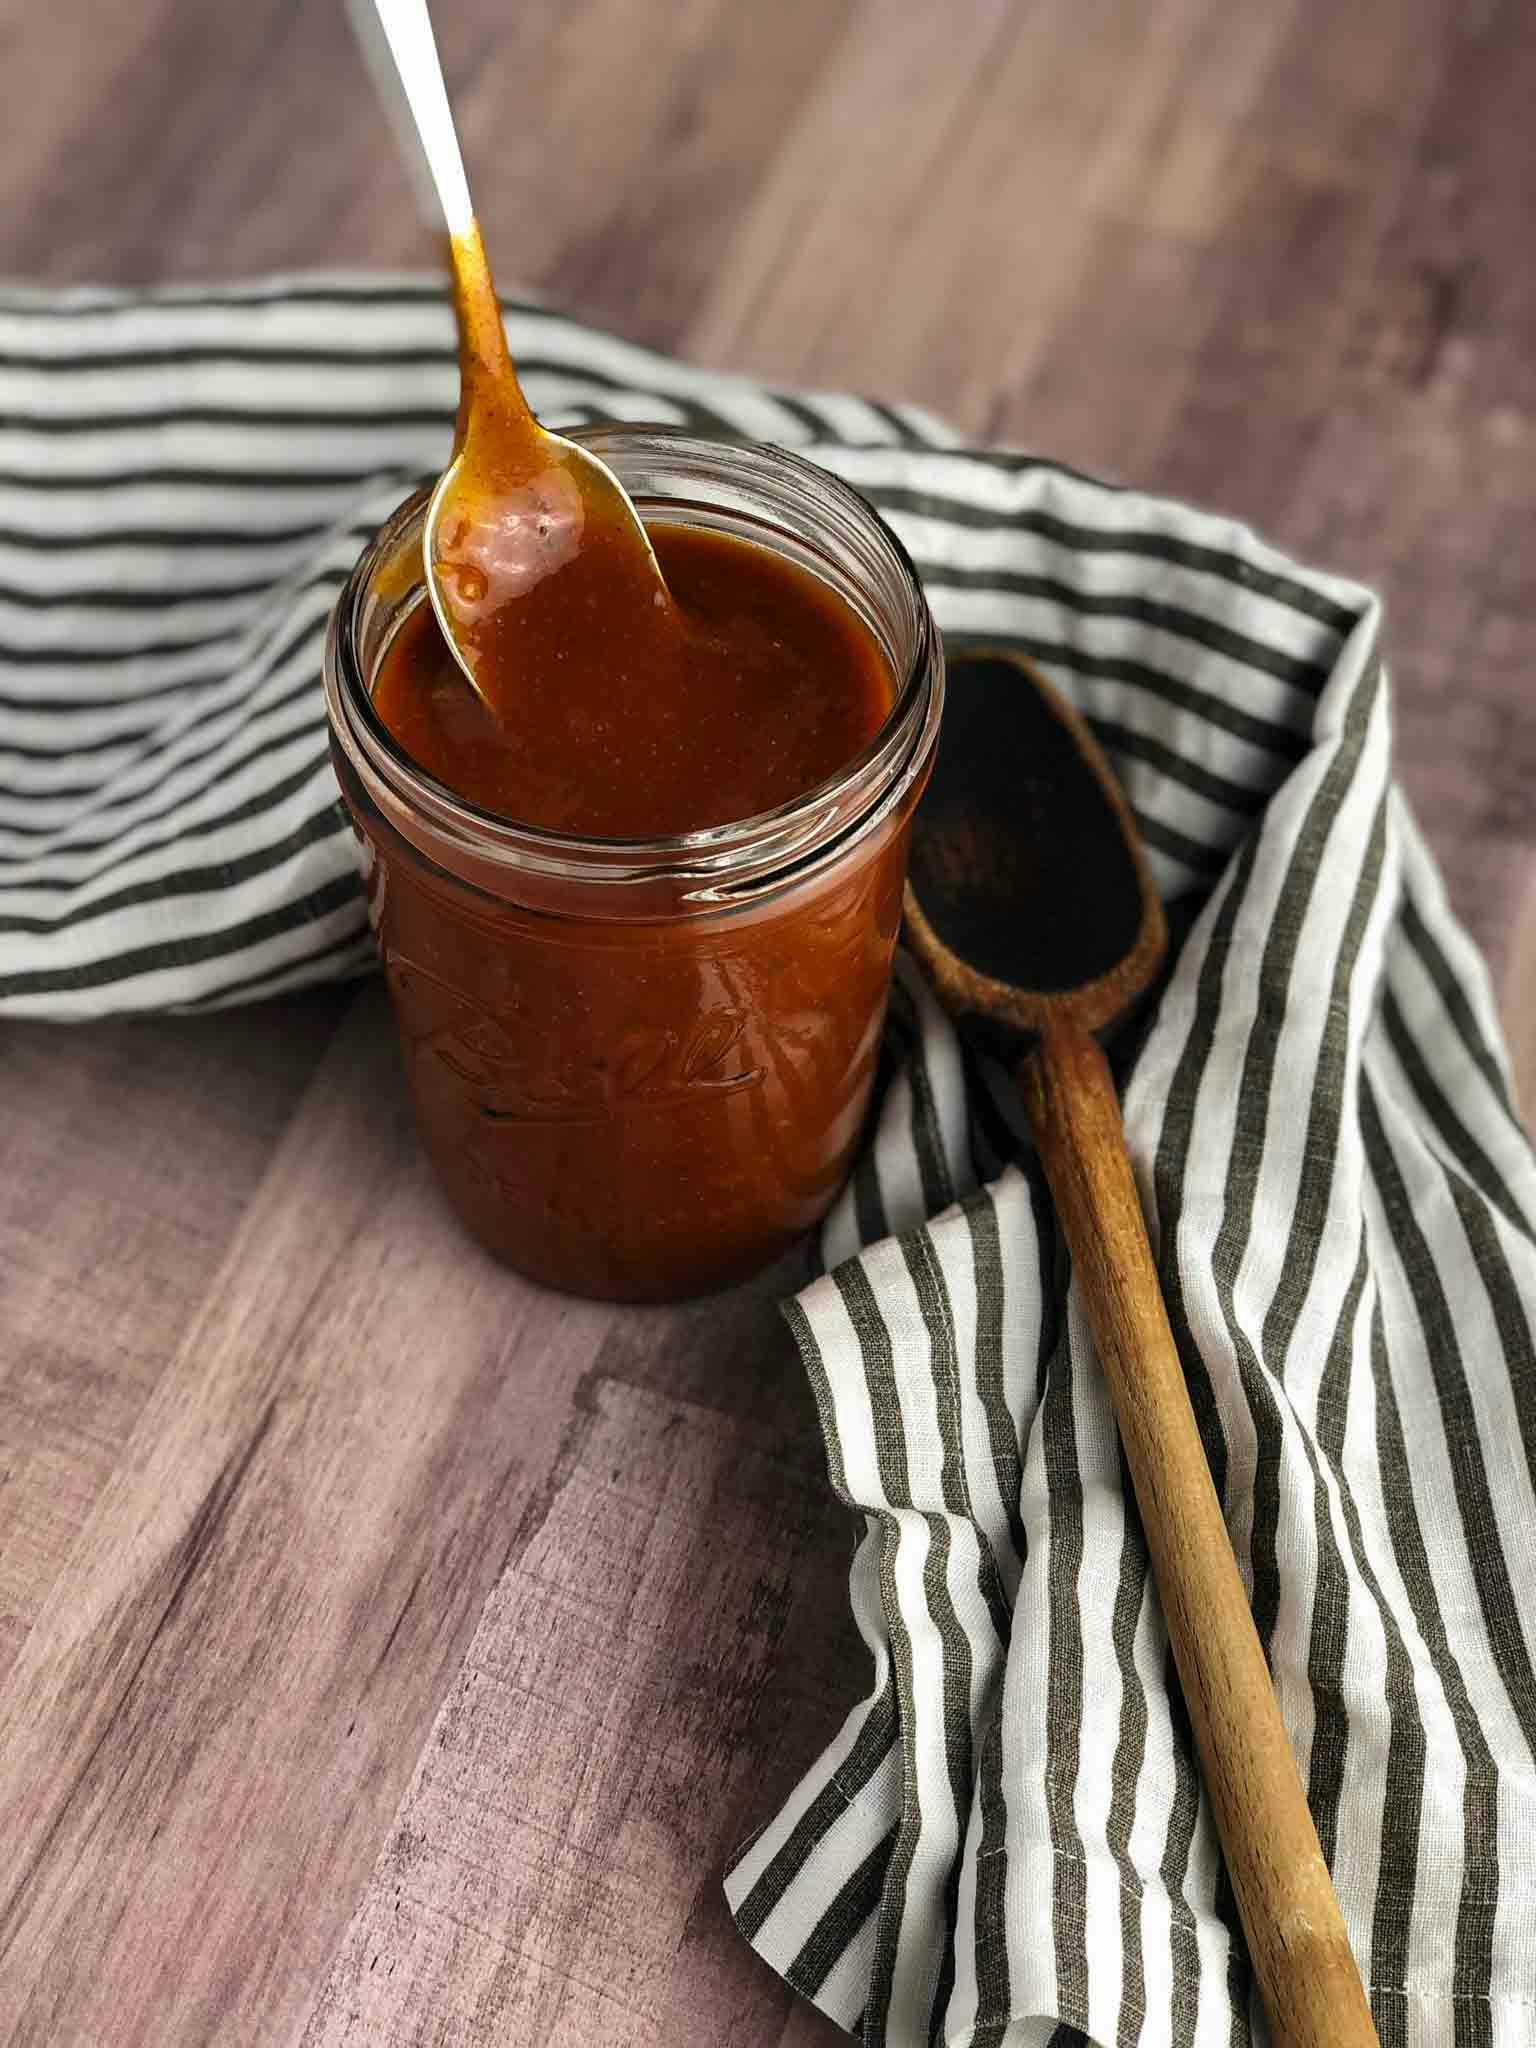 Enchilada sauce in a glass jar with a spoon dipped into it.